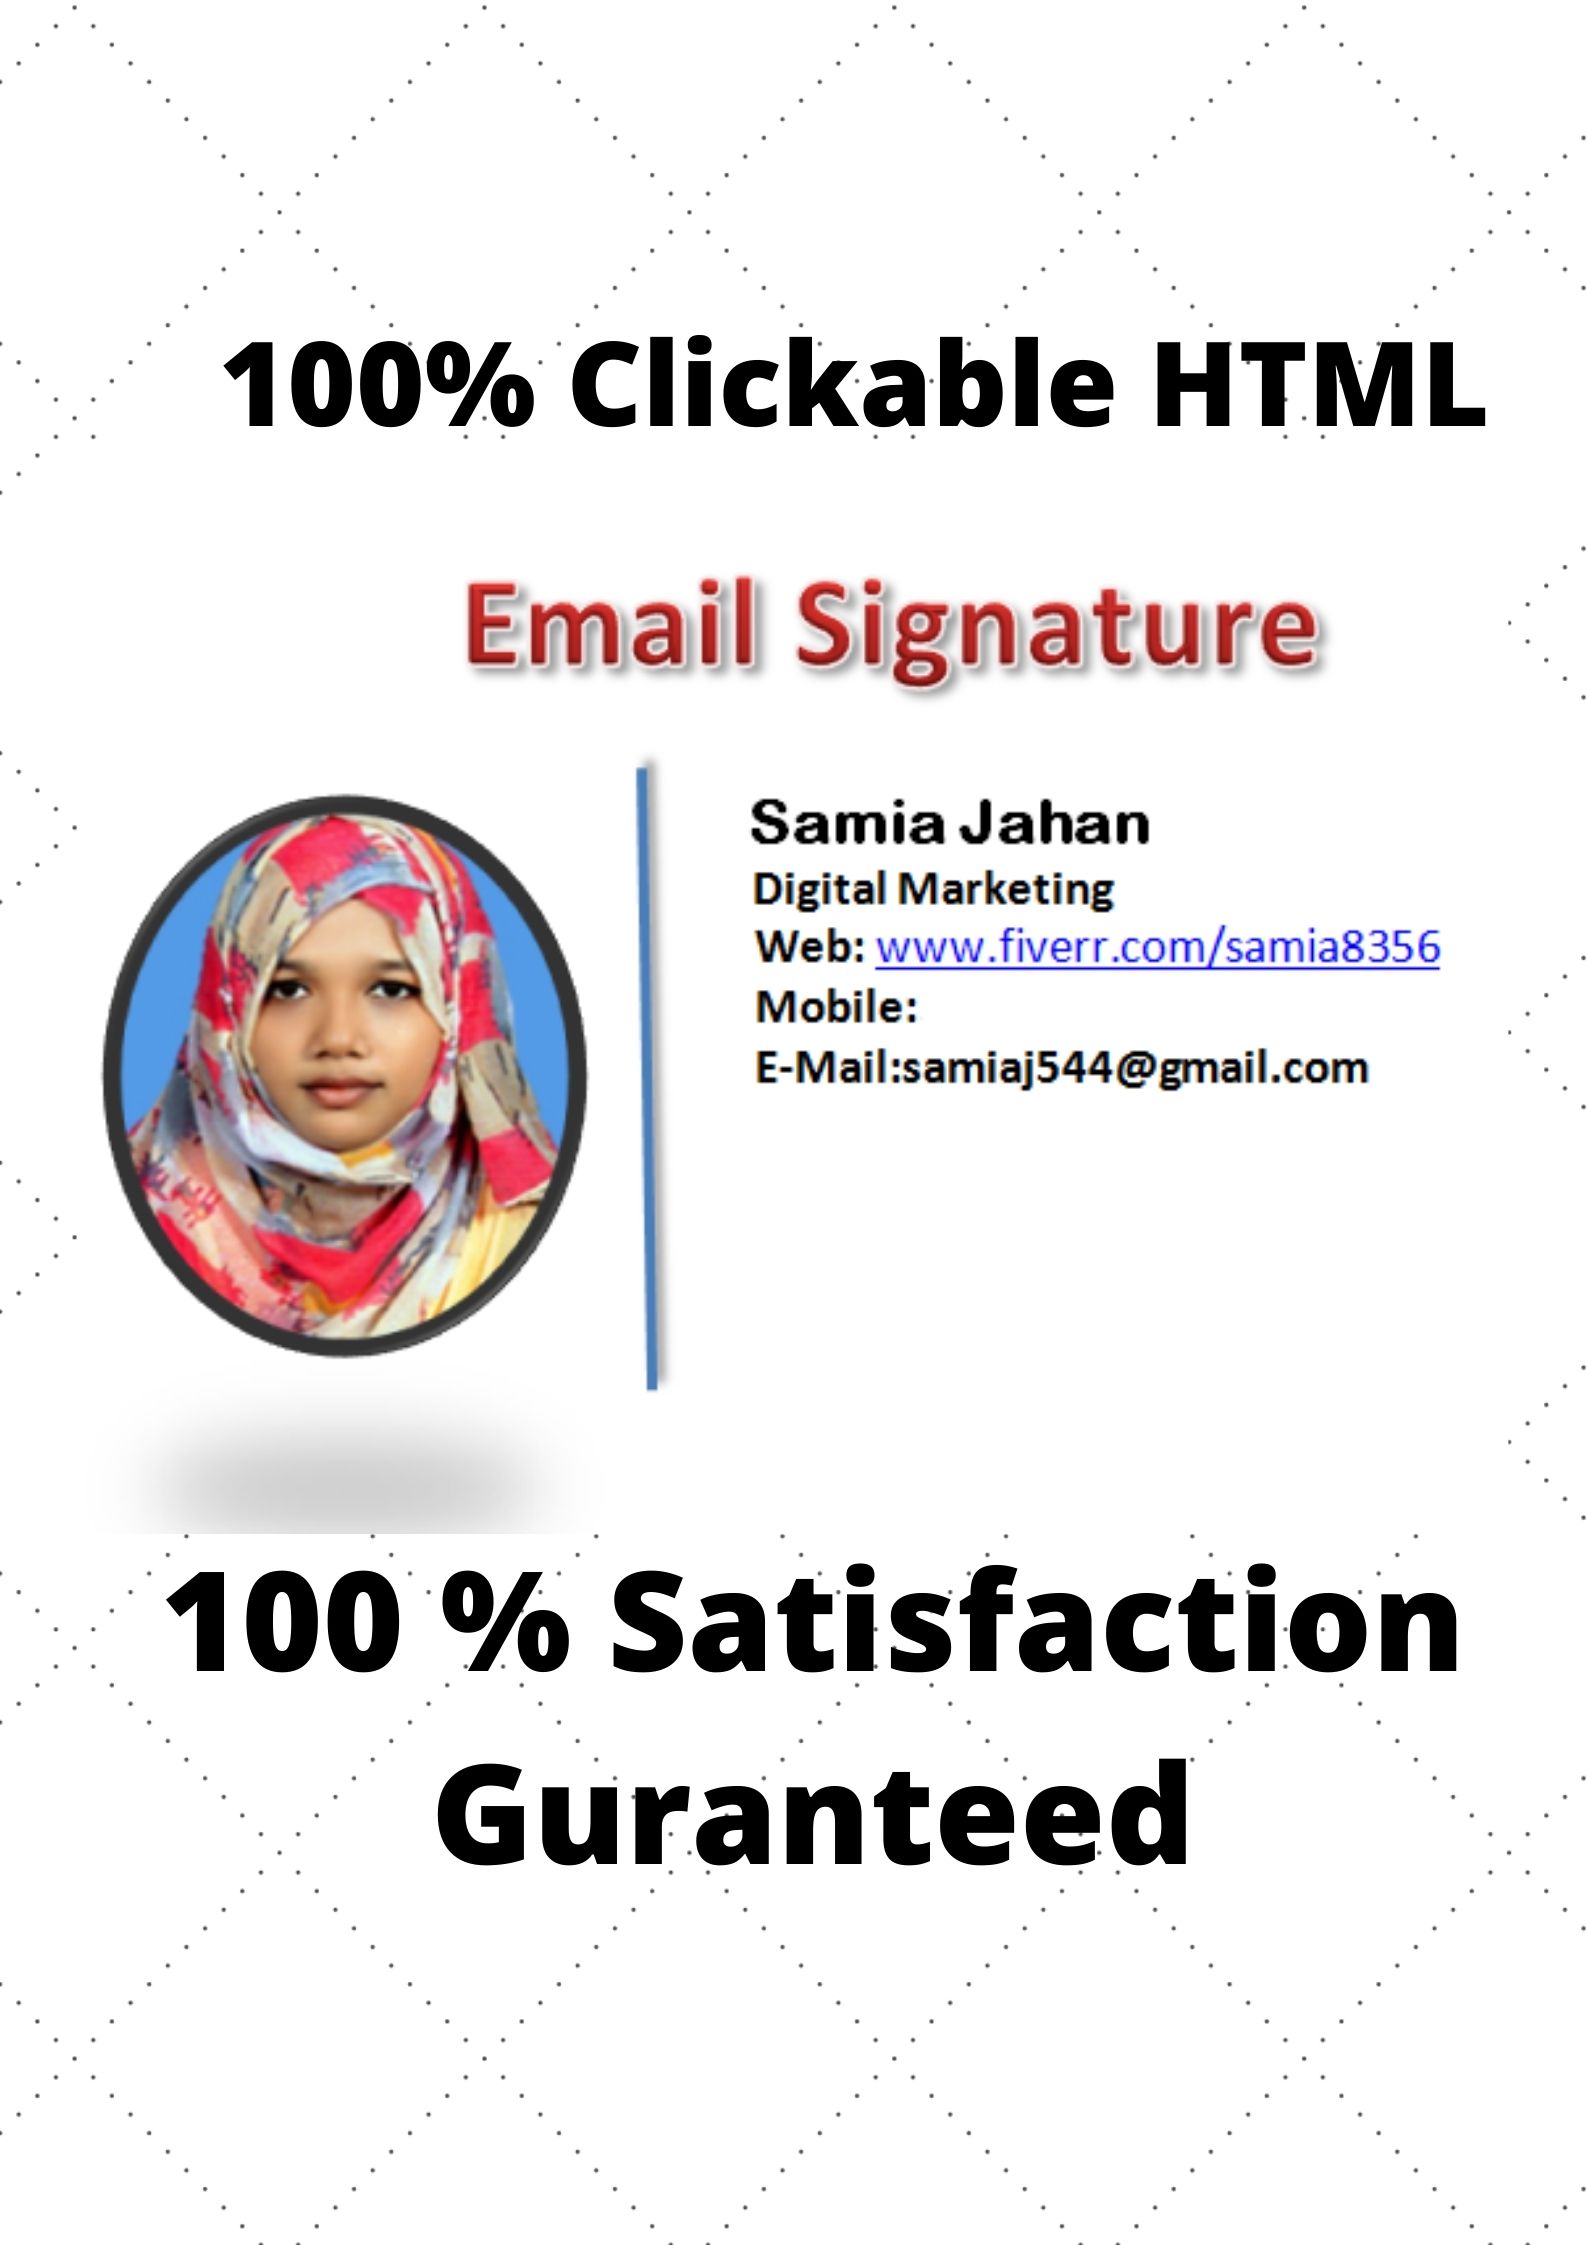 100% Clickable Best Quality HTML Professional Email Signature